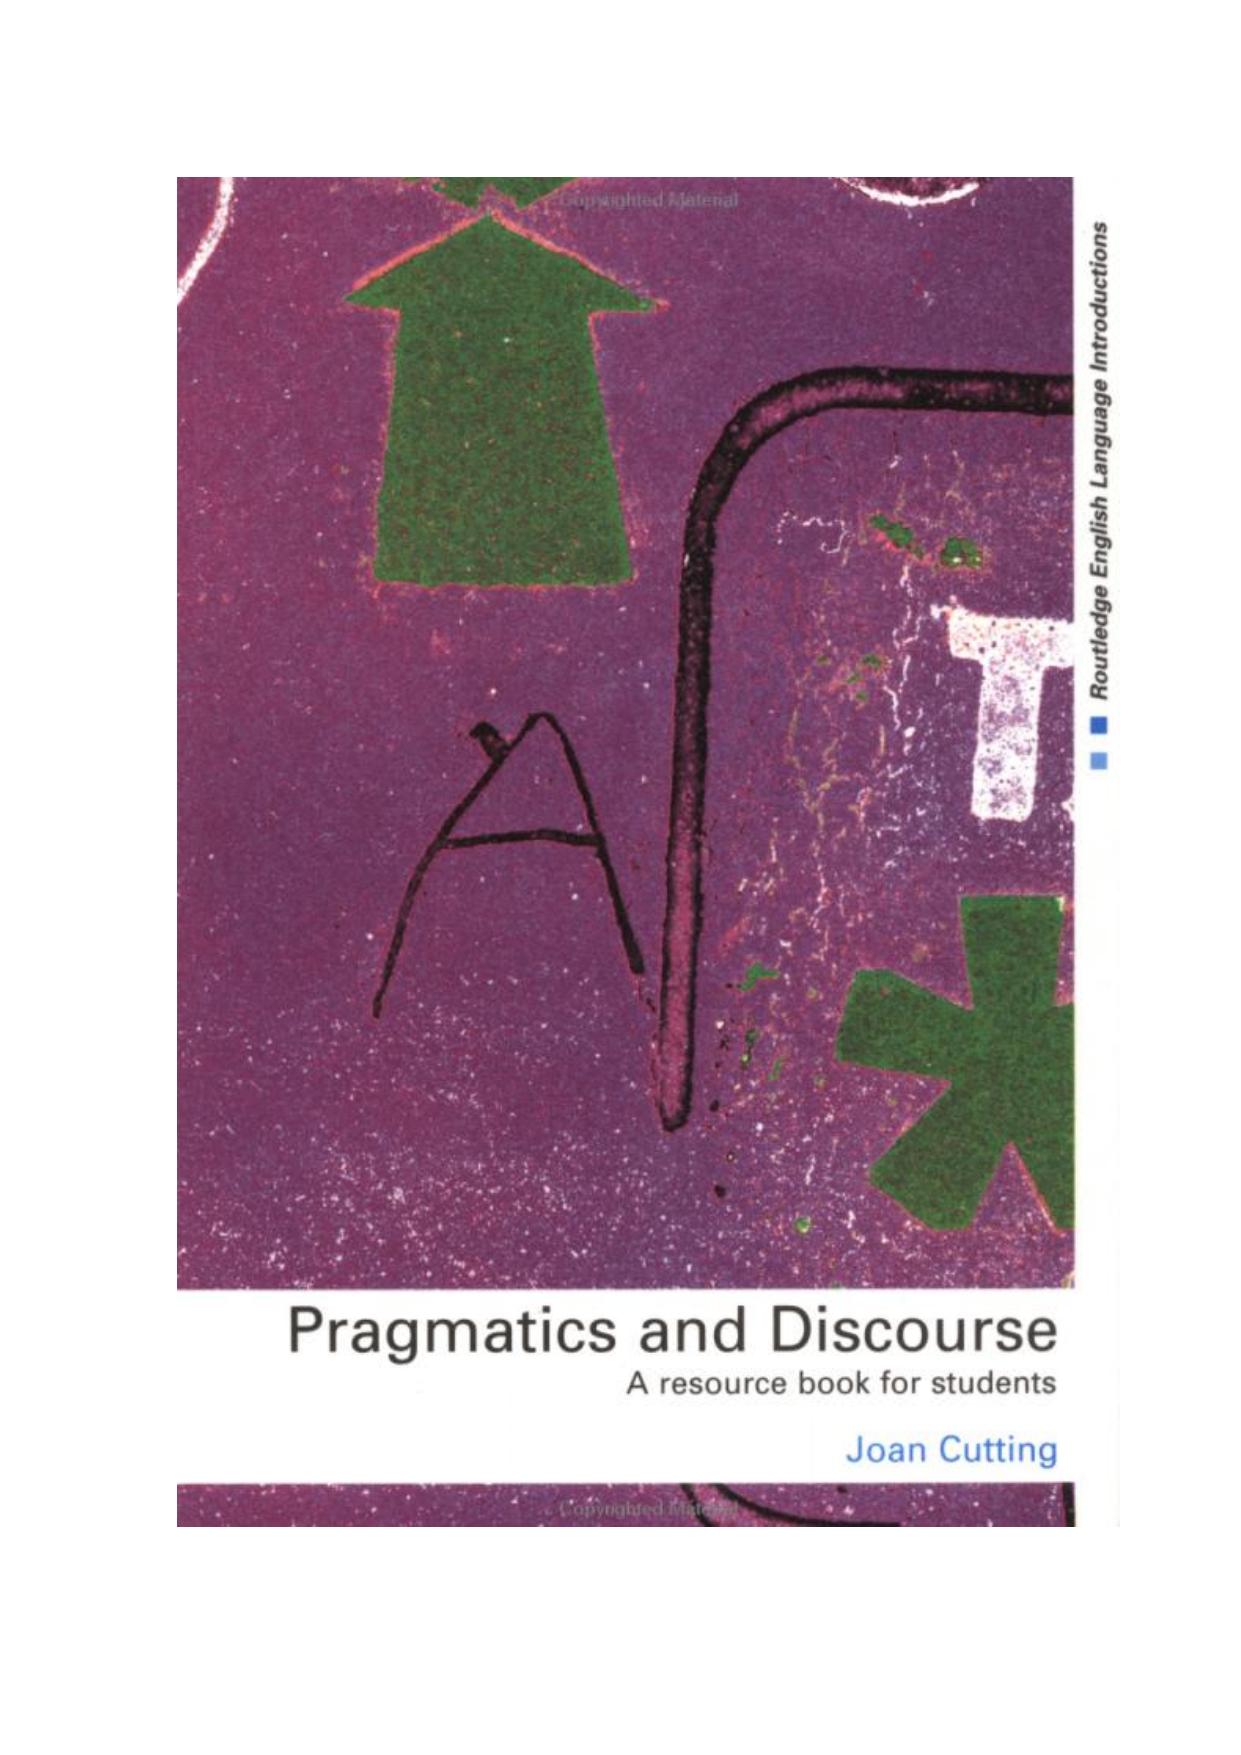 Pragmatics and Discourse: A Resource Book for Students